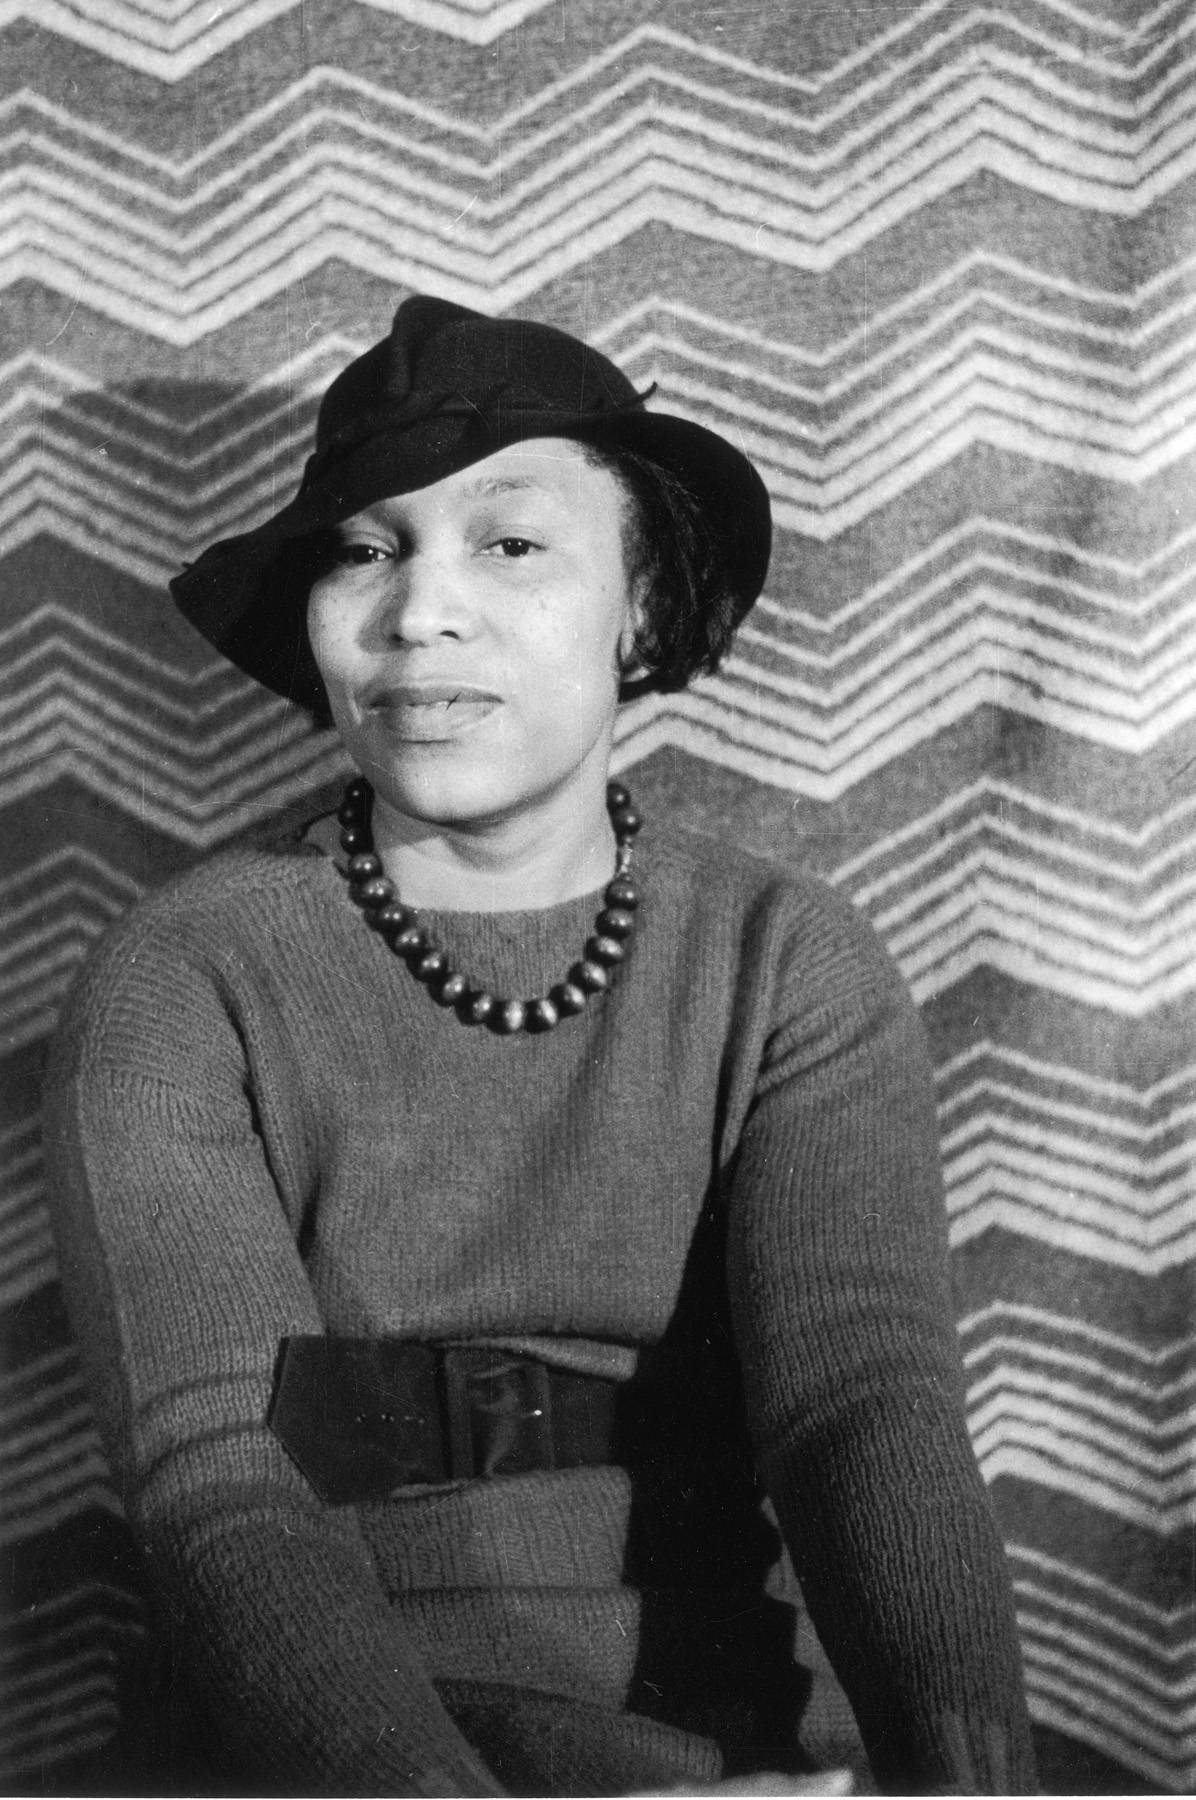 Zora Neale Hurston - Author of Their Eyes Were Watching God, Zora Neale Hurston was a trailblazer for the likes of Alice Walker, Toni Morrison and Ralph Ellison. Hurston was a key member of the Harlem Renaissance and a preeminent writer from the 20th century.&nbsp;(Photo: Fotosearch/Getty Images).